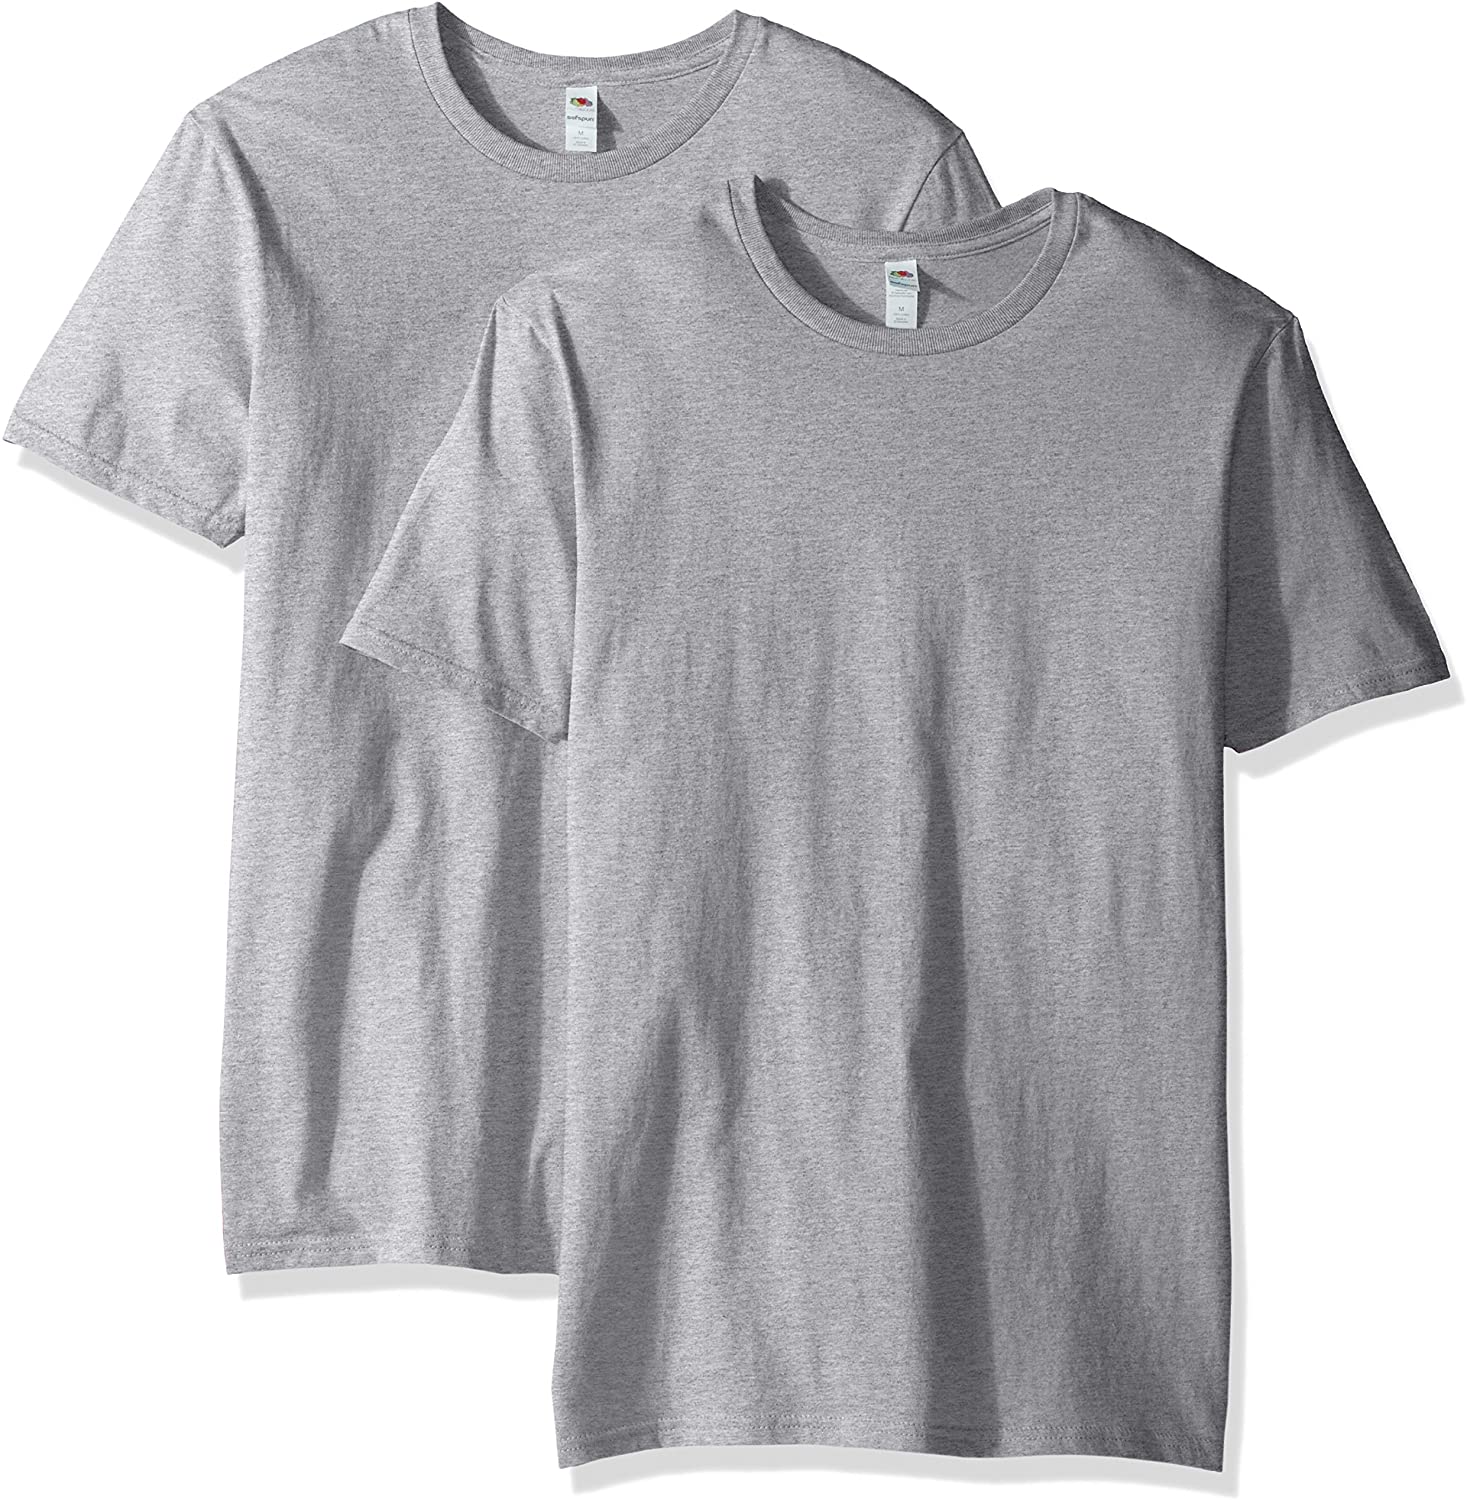 Fruit of the Loom Men's Crew T-Shirt (2 Pack), Heather Grey, XX-Large ...